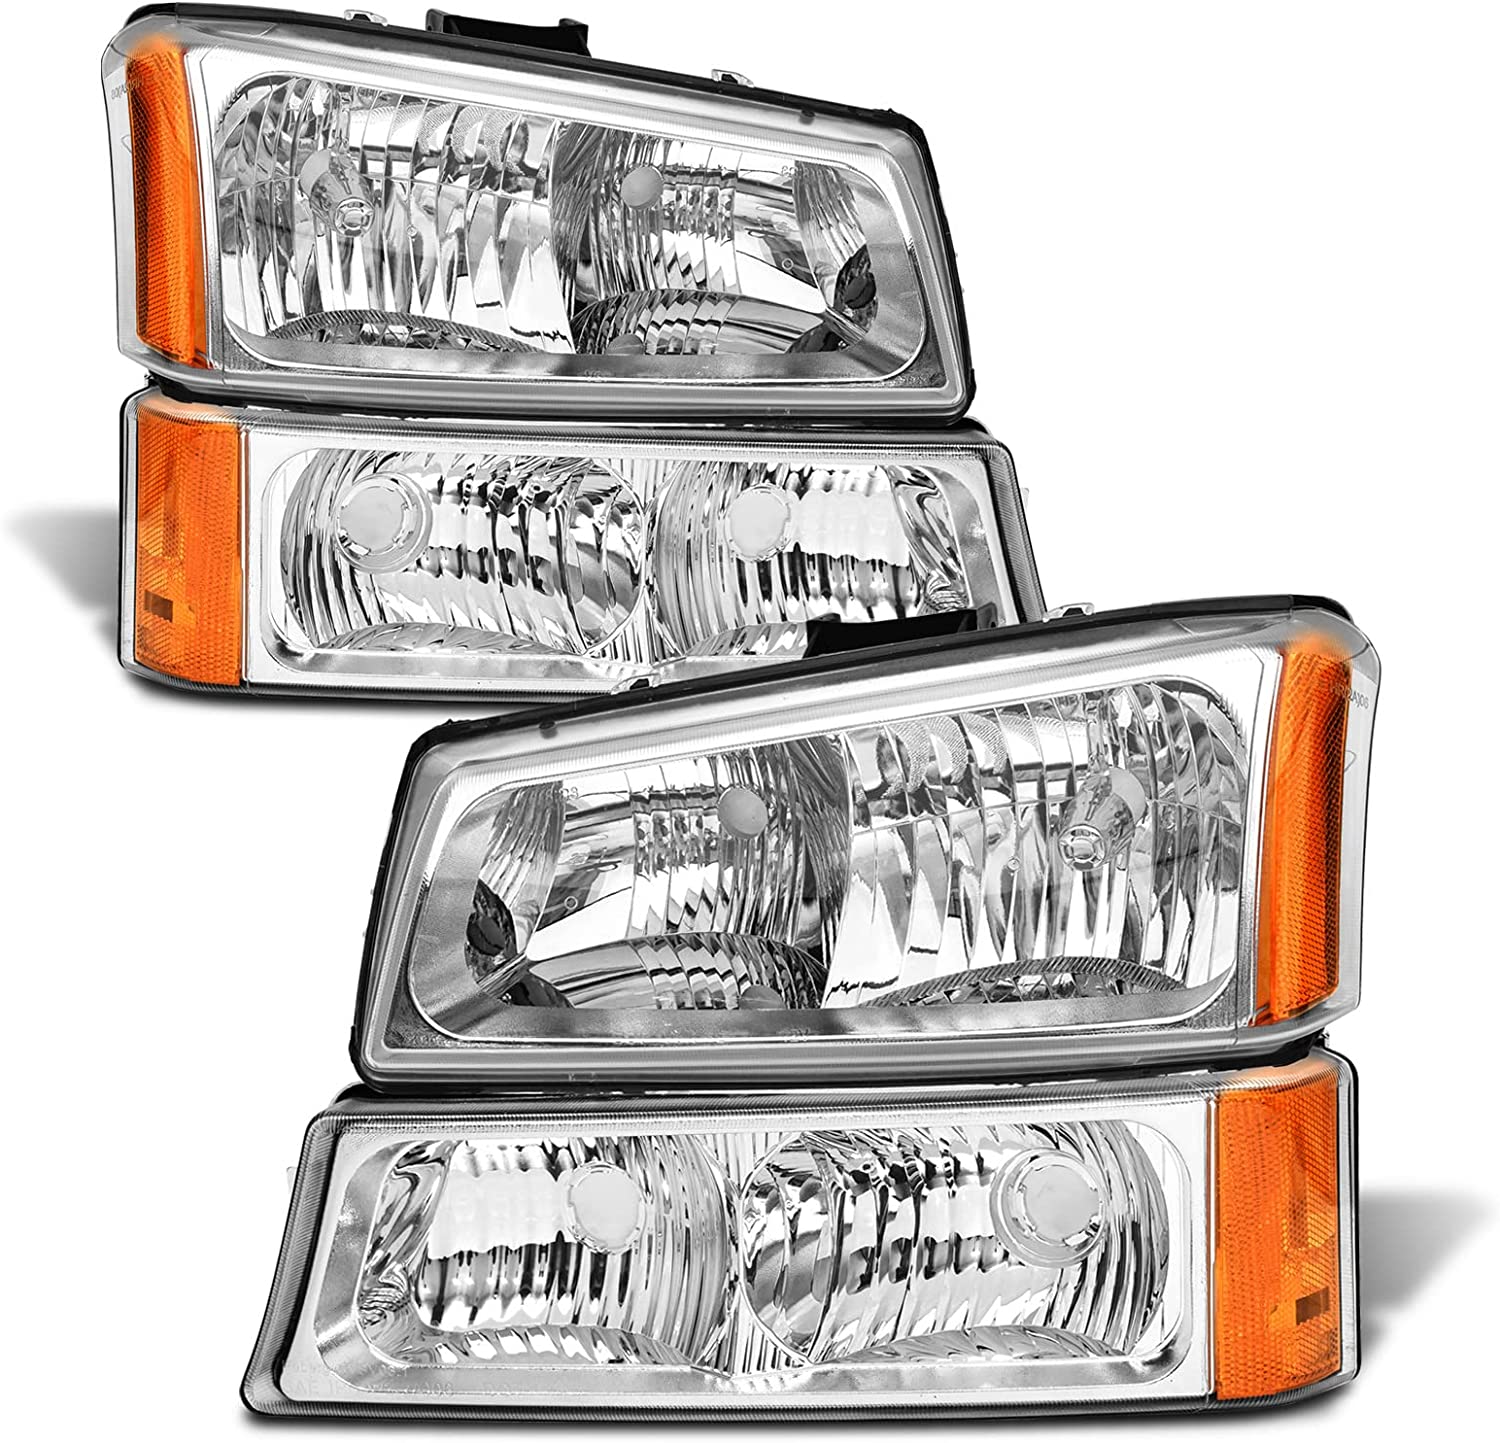 KAC Headlights Assembly Pair Compatible With Compatible With Accord 2003 2004 2005 2006 2007 2/4Dr Chrome Housing Amber Corner